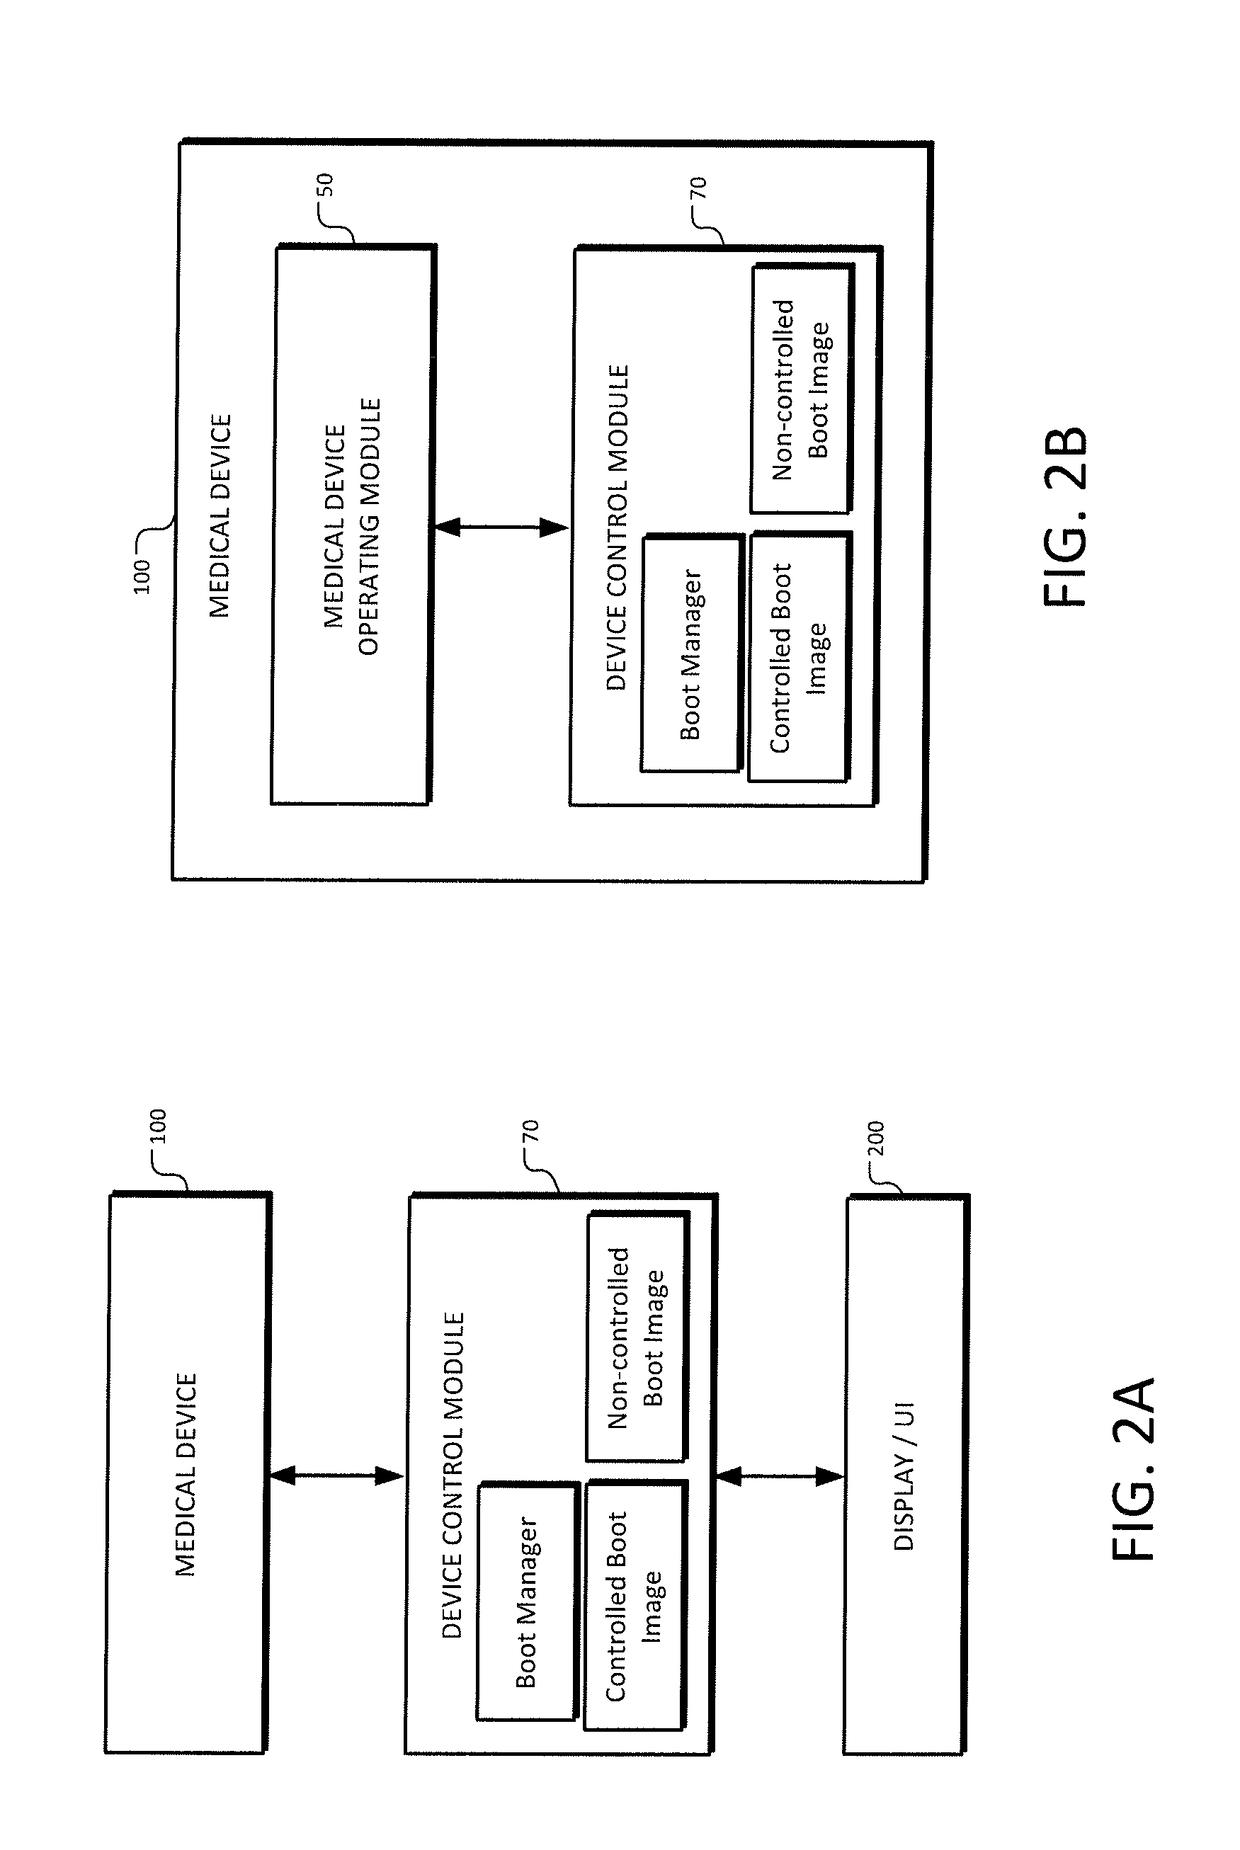 Method and Apparatus for Medical Devices Under Regulatory Control